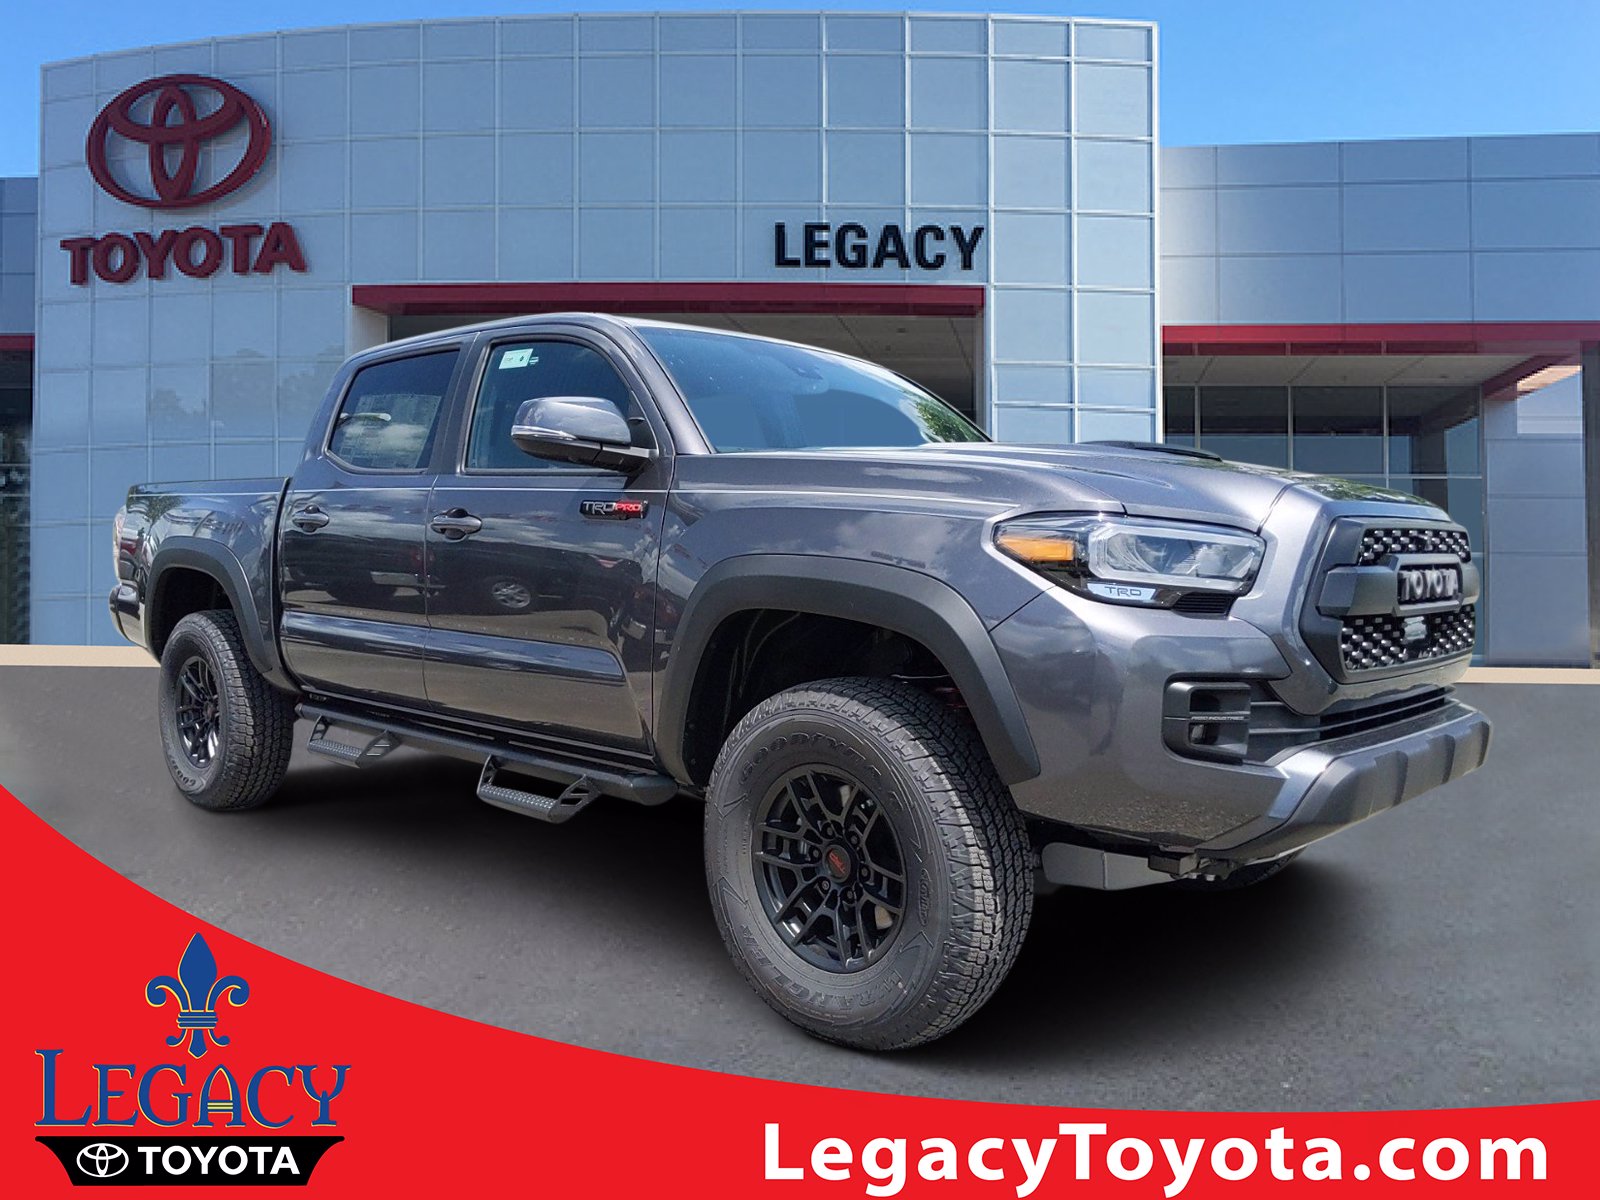 New 2020 Toyota Tacoma Trd Pro Double Cab In Tallahassee Lx234502